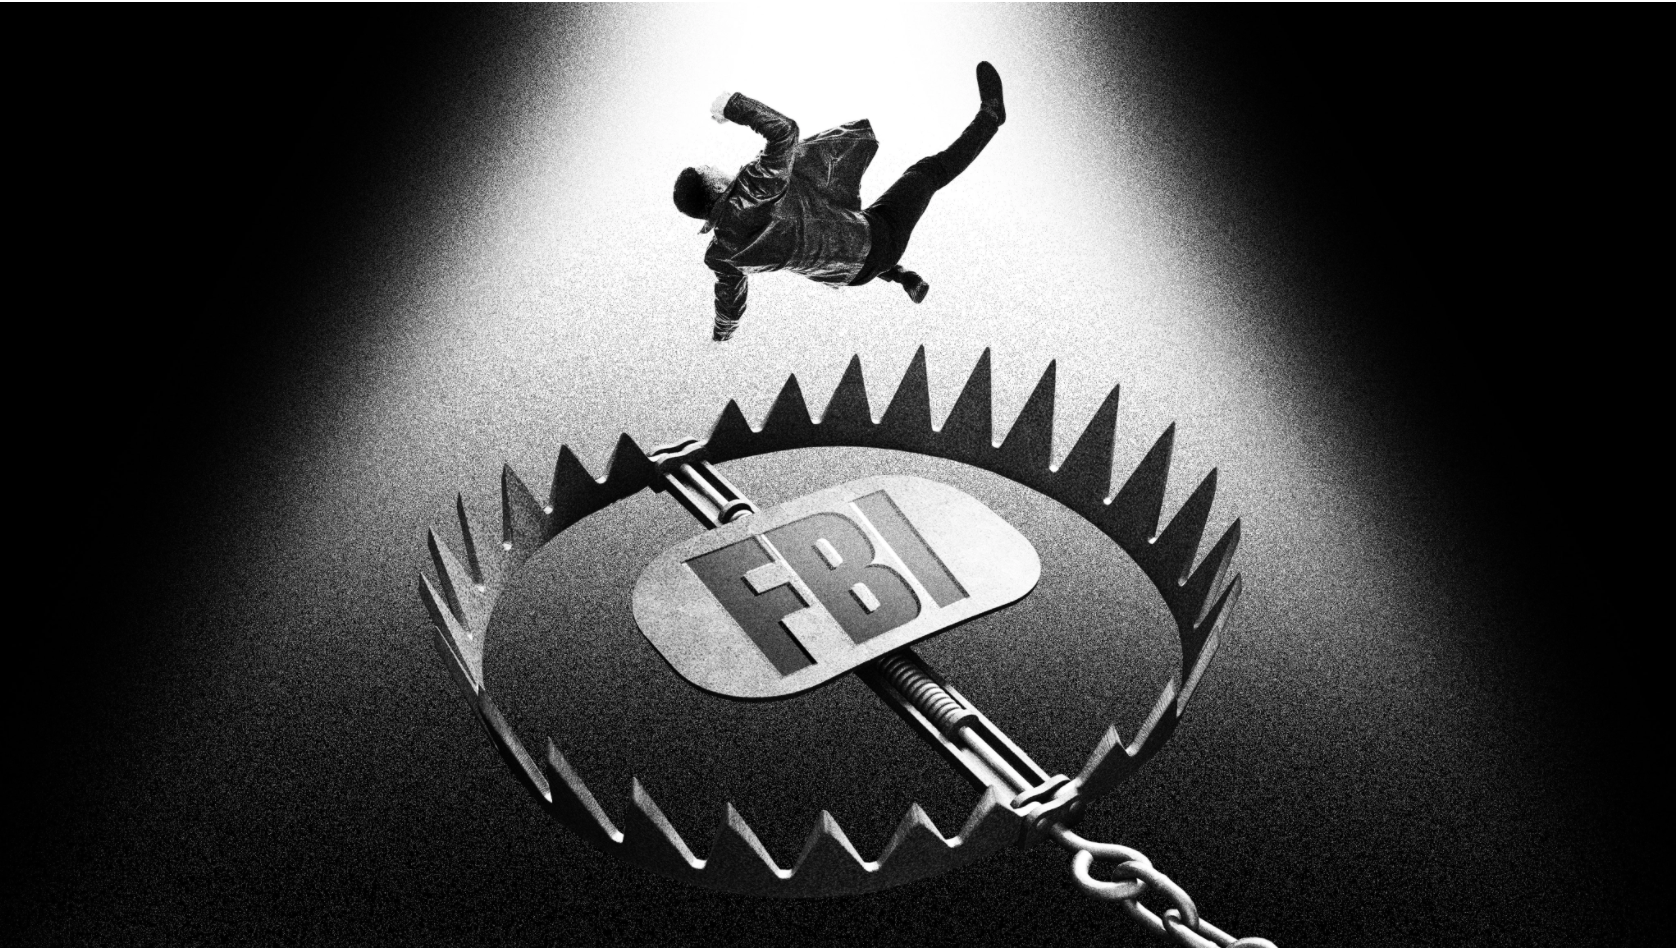 The FBI’s Mafia-Style Justice: To Fight Crime, the FBI Sponsors 15 Crimes a Day